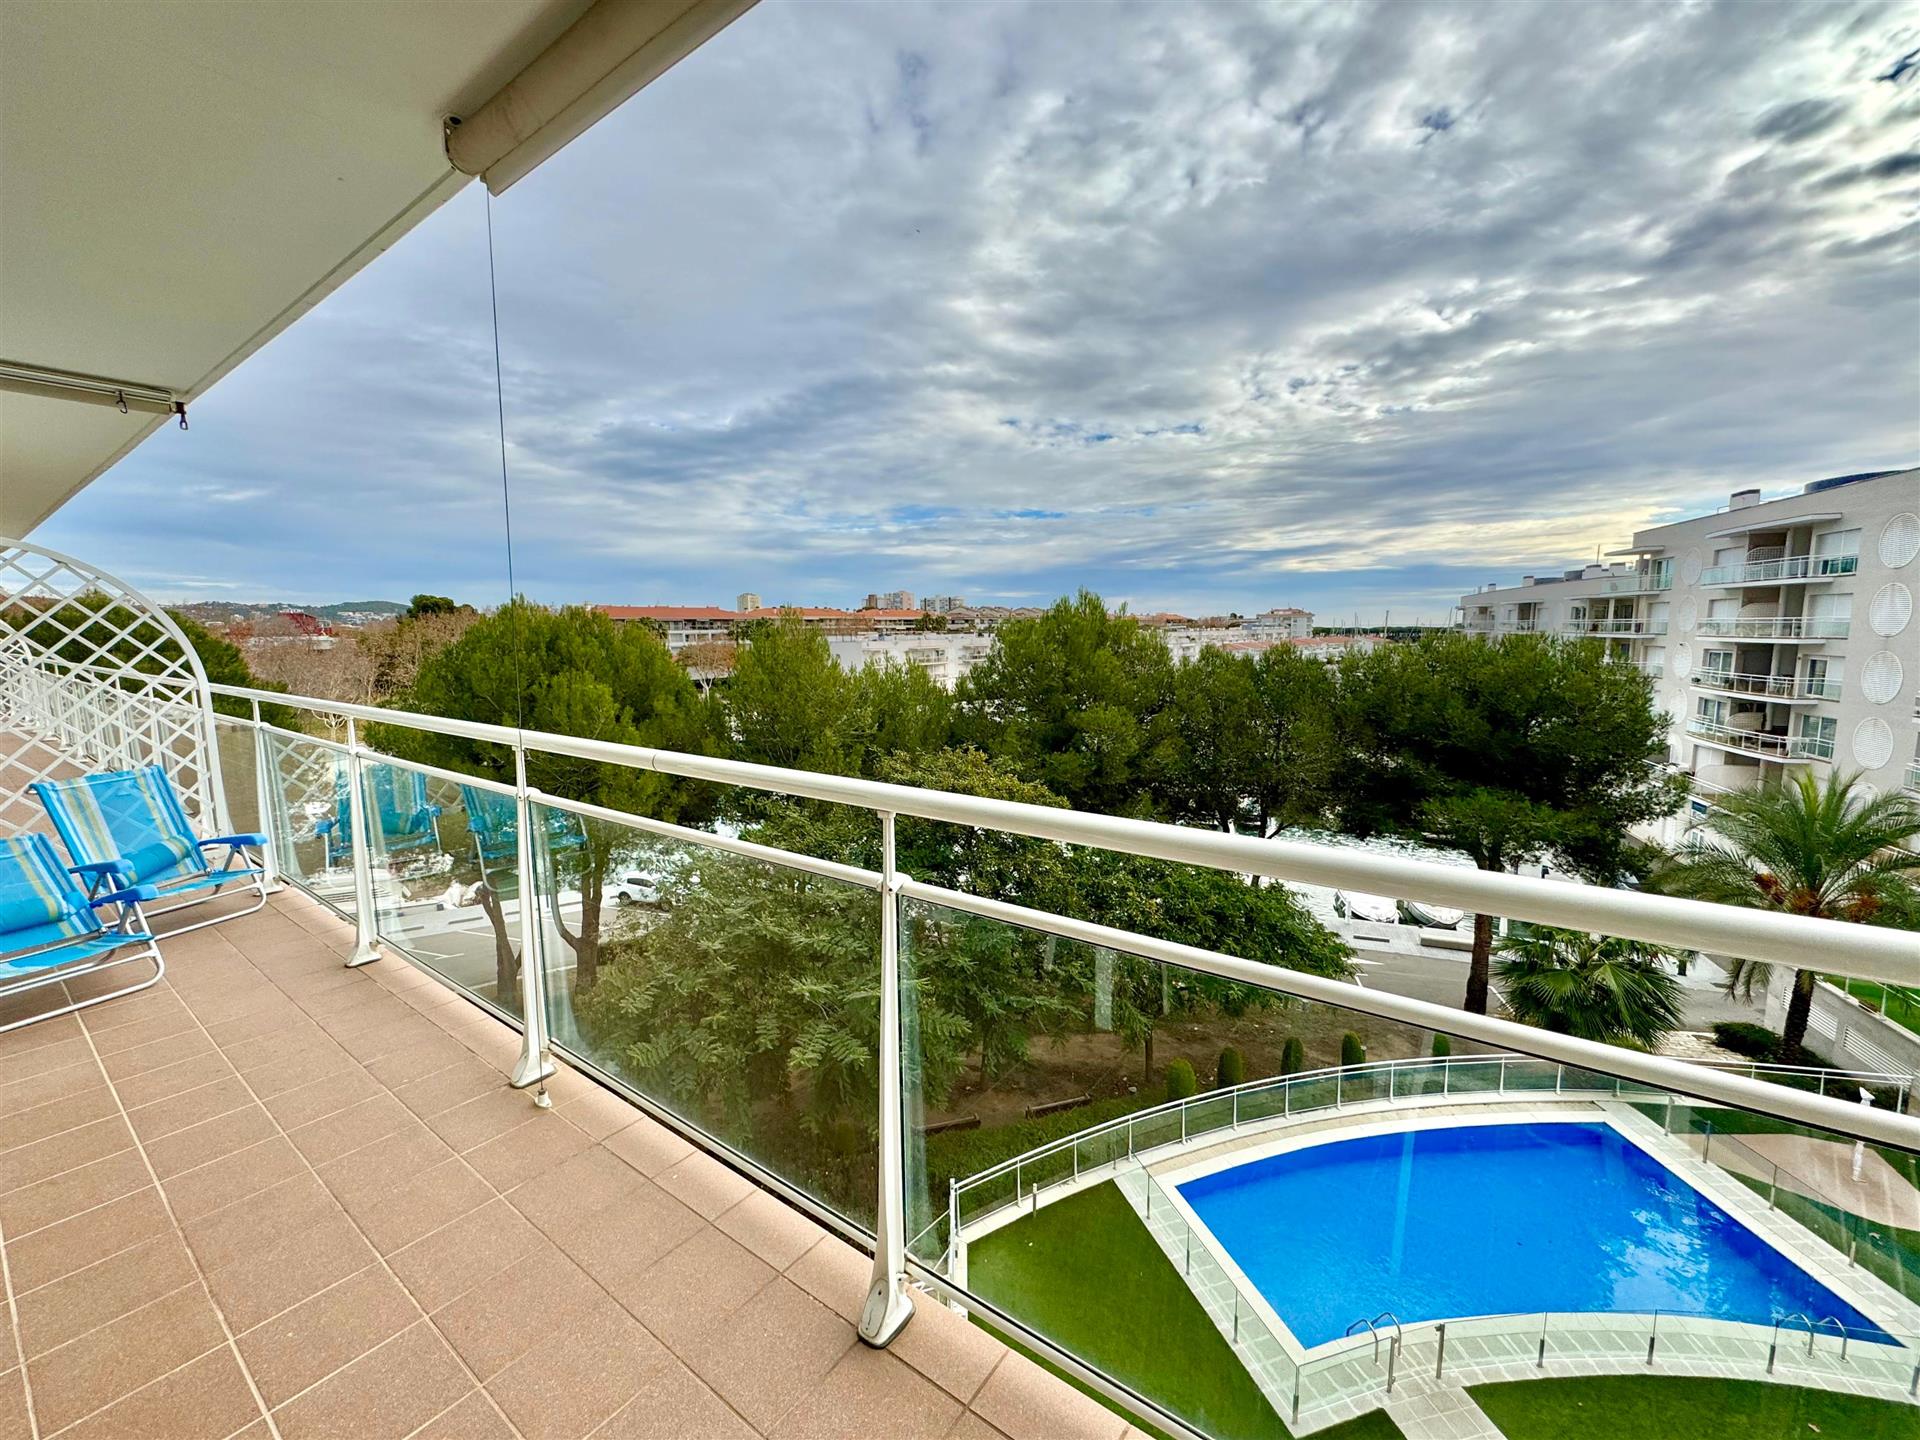 Apartment located in the port area of Platja d'Aro with fantastic unobstructed views and sea views